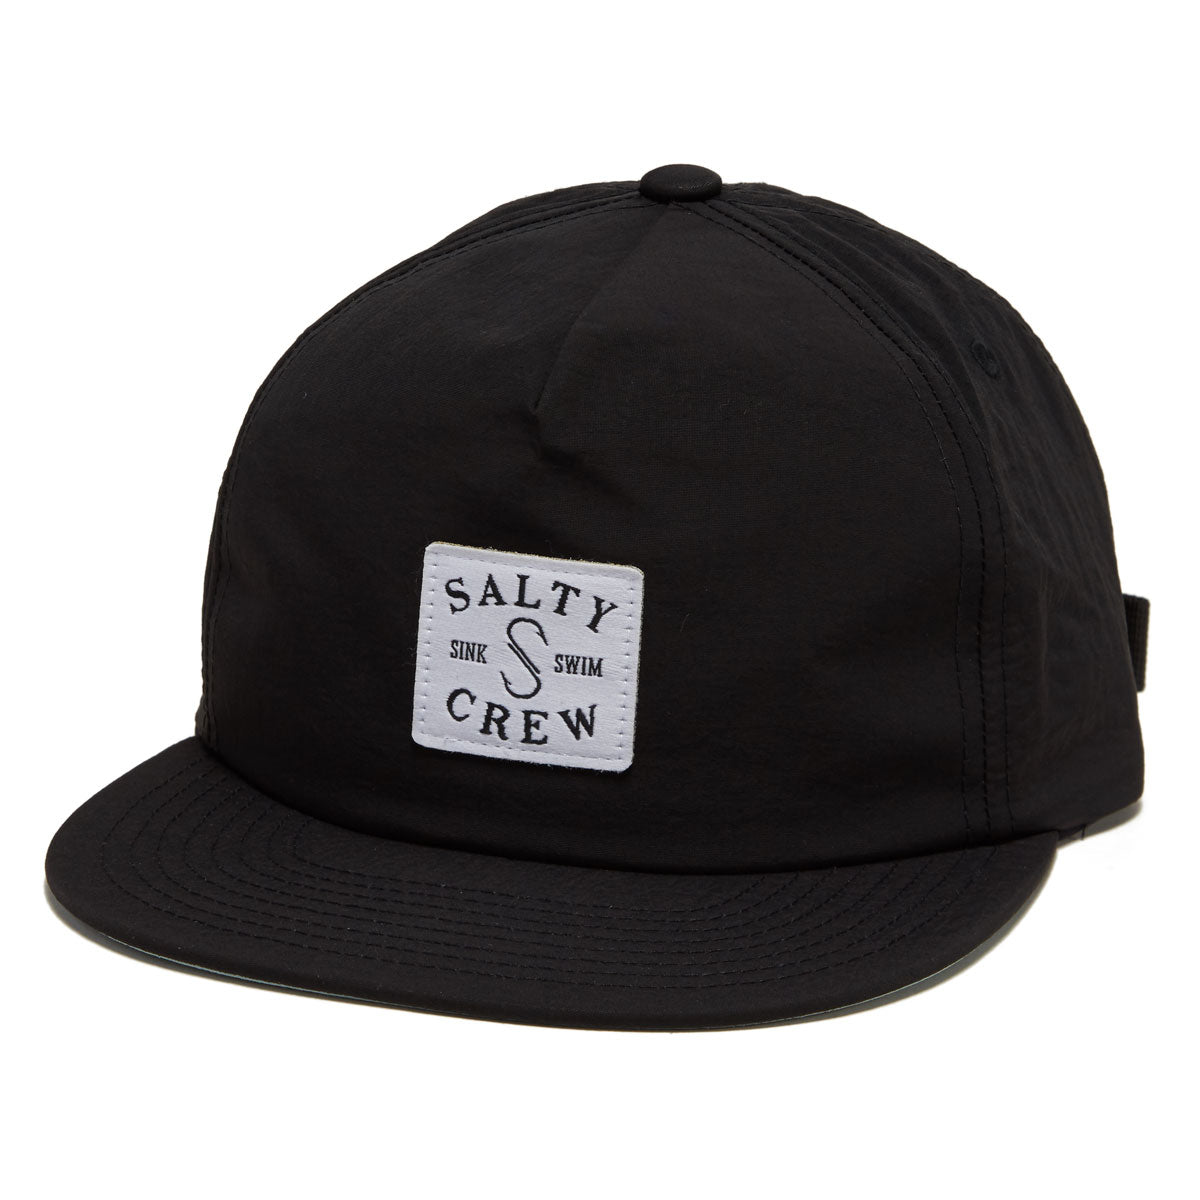 Salty Crew Clubhouse 5 Panel Hat - Black image 1